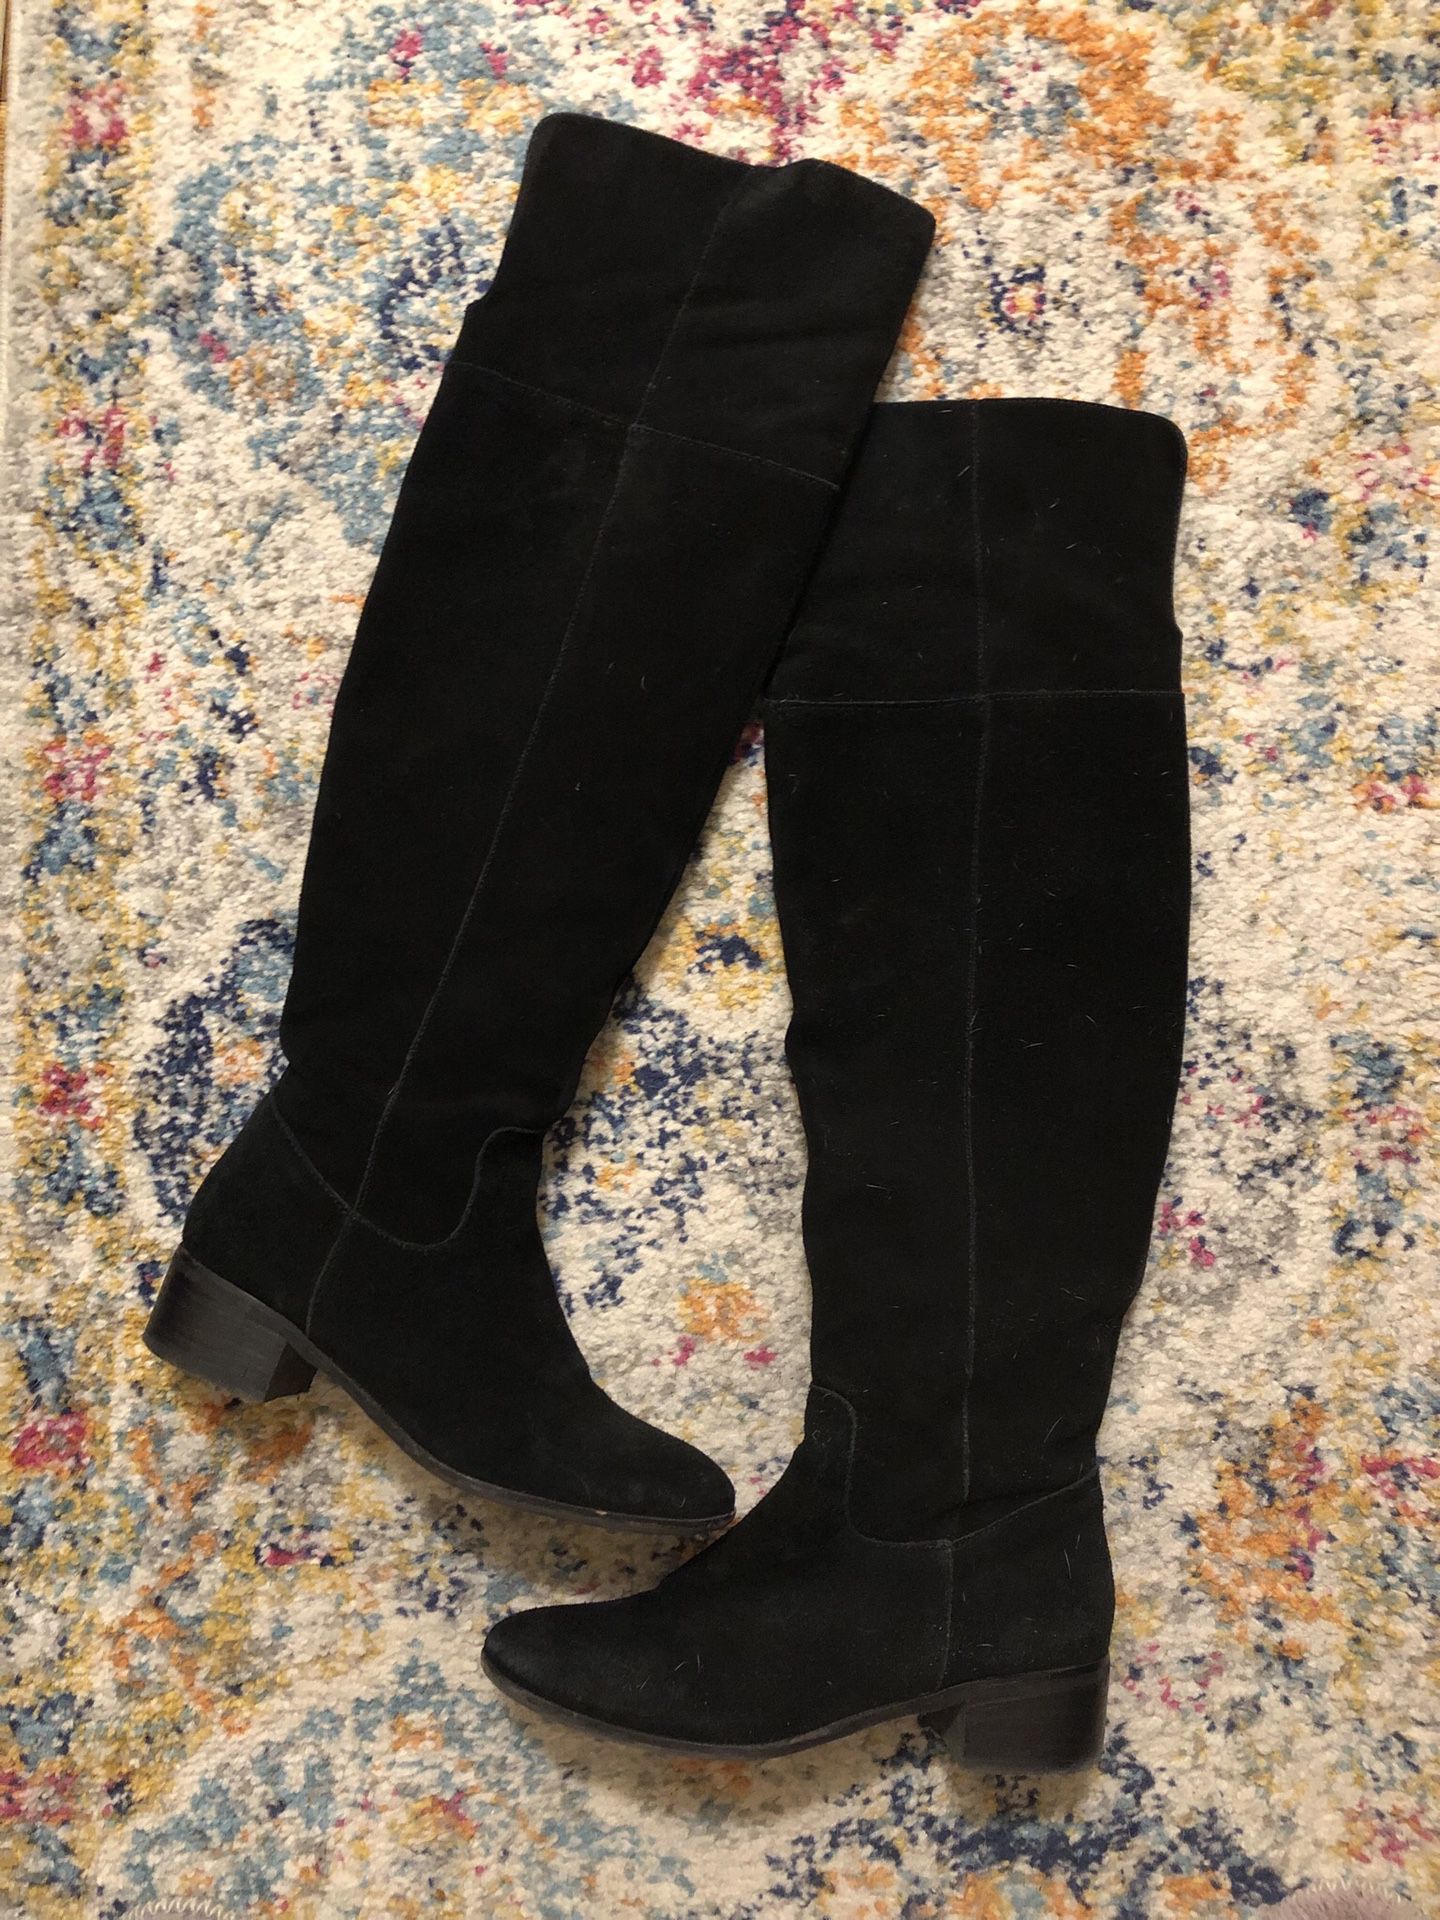 Steve Madden over the knee suede boots, size 8